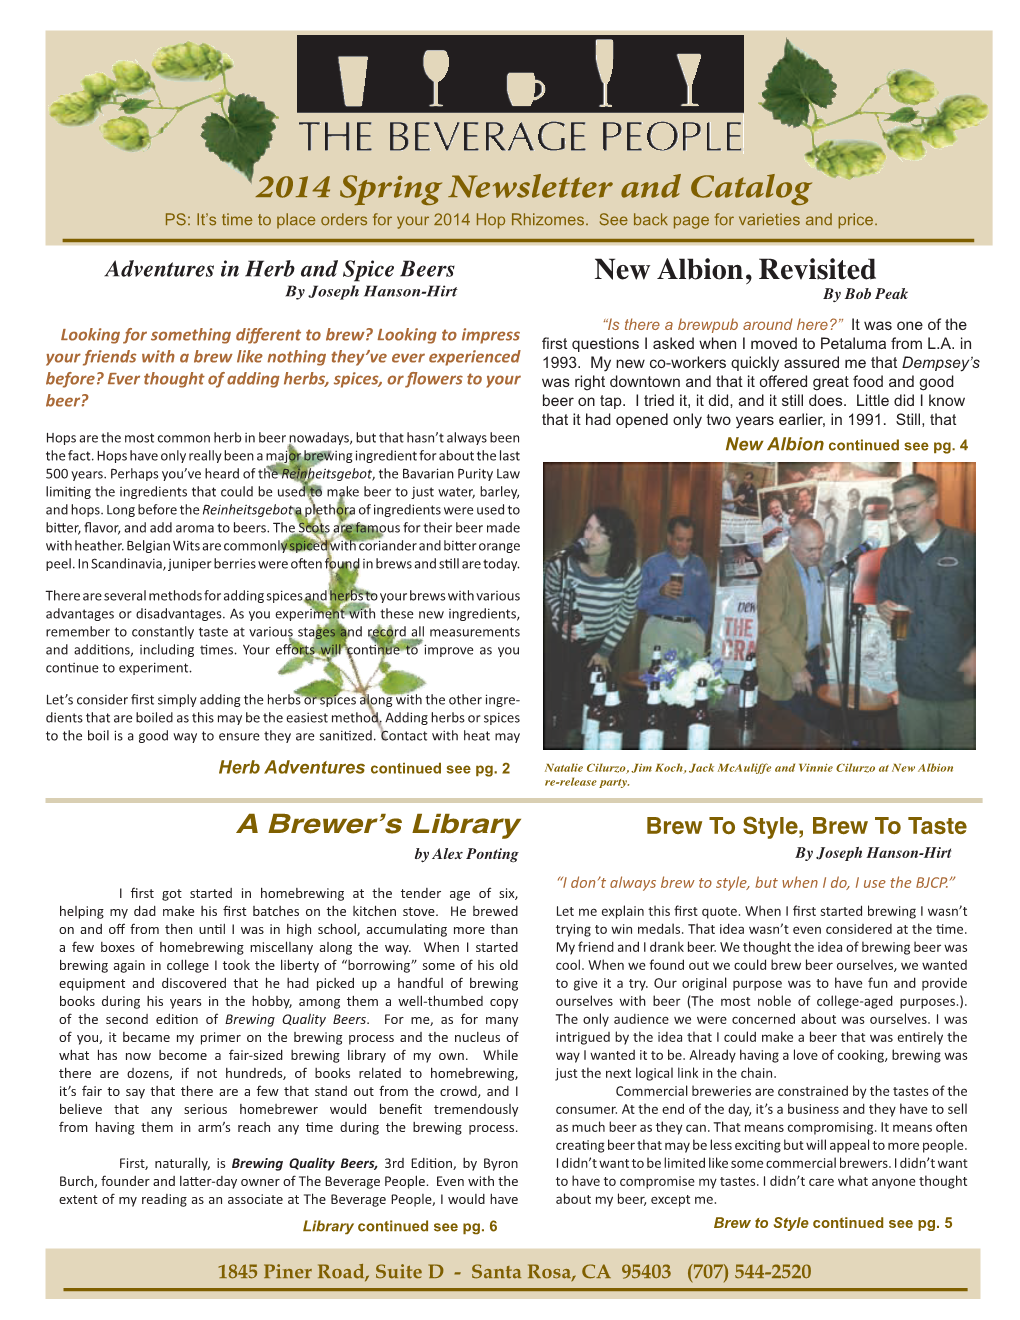 2014 Beer Newsletter and Catalog